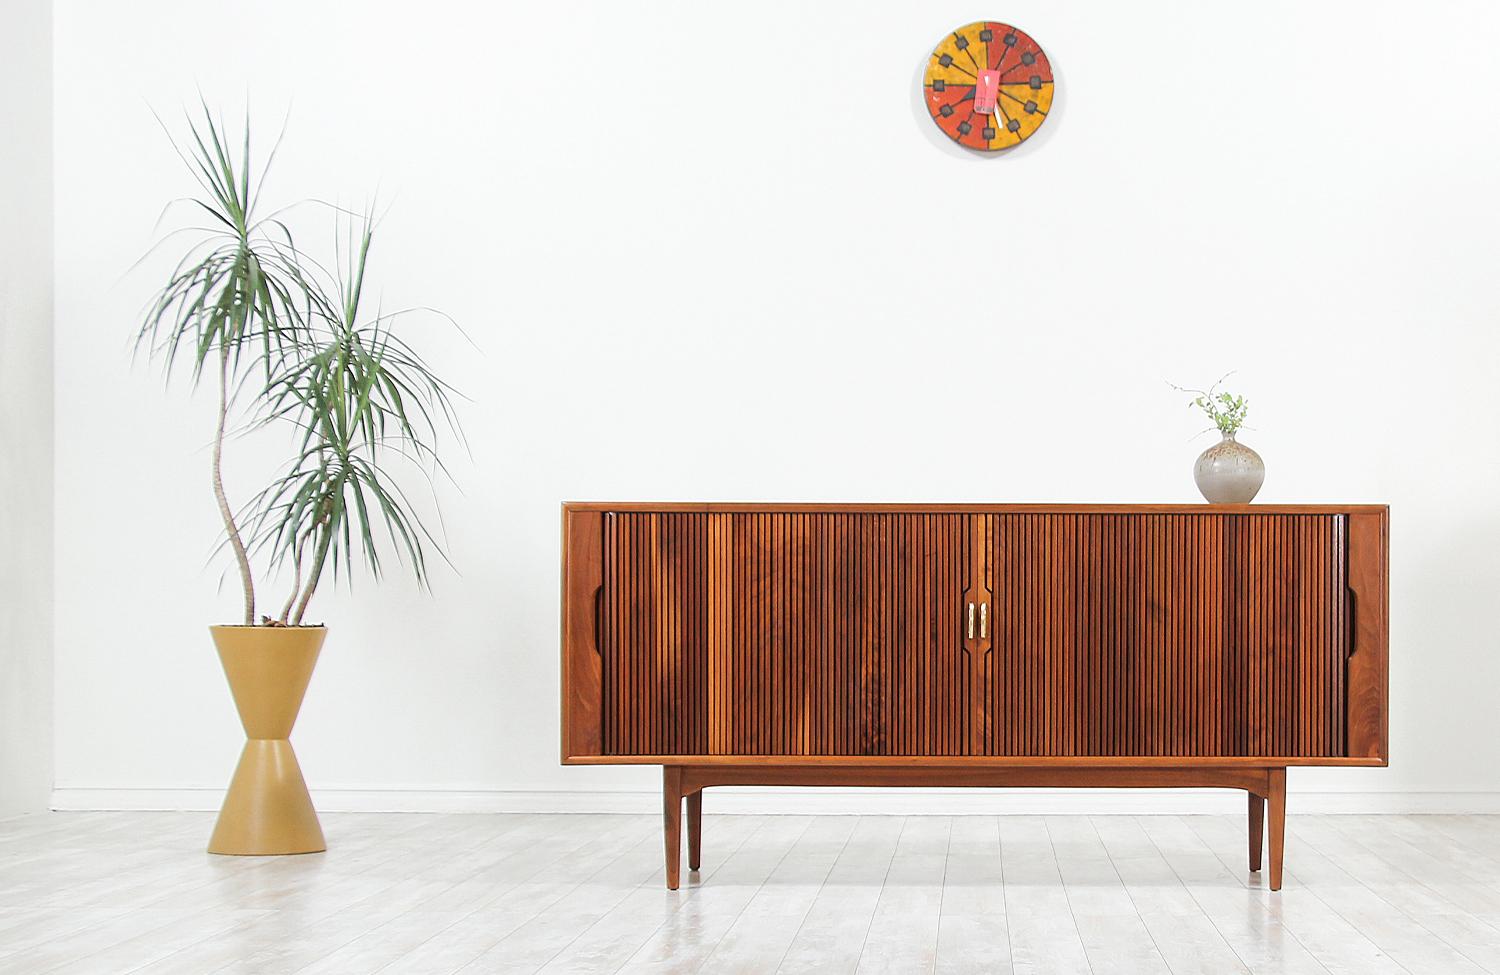 Mid-Century Modern tambour door credenza designed by Kipp Stewart & Stewart MacDougall for Drexel’s “Declaration” line in the United States, circa 1960s. This Fine credenza features a walnut wood frame with a beautiful grain detail and smooth